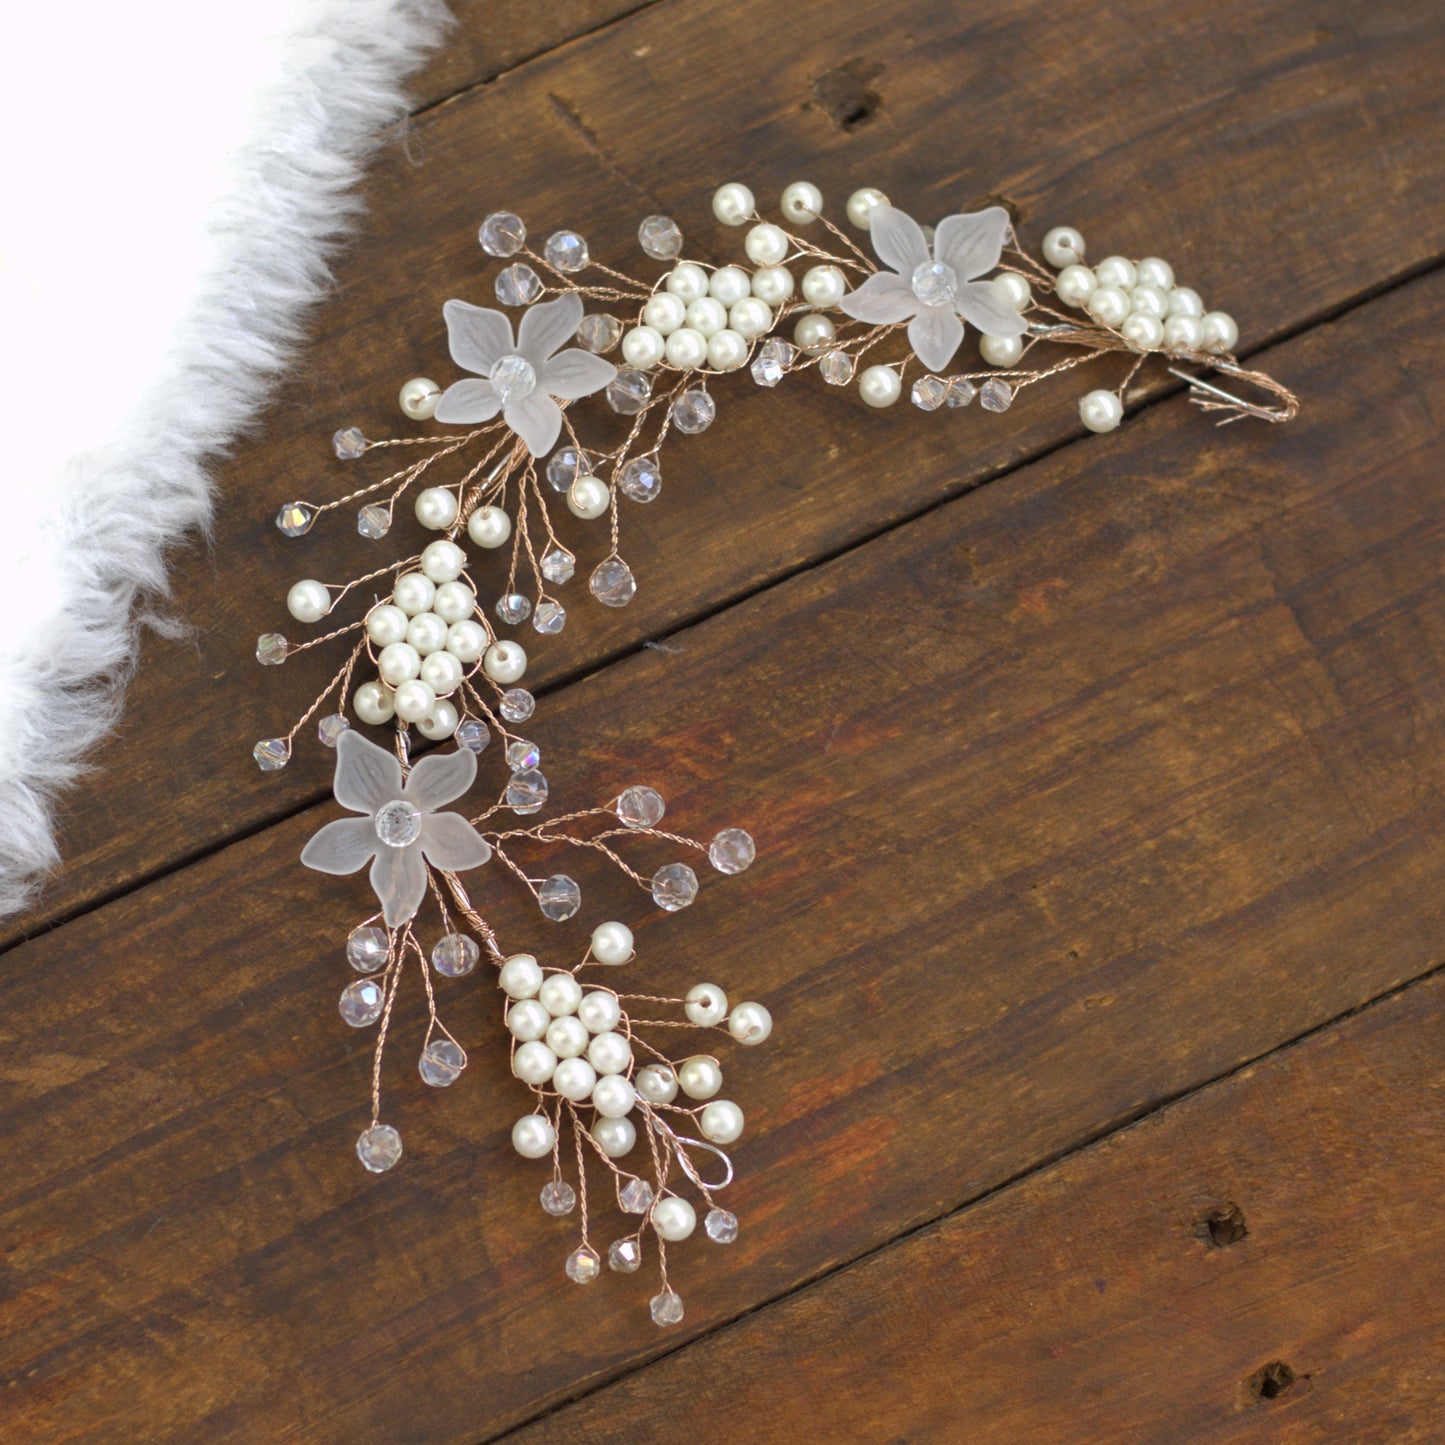 Flexible Crystal Flower with Pearls Artificial Hair Bun Flower Accessory